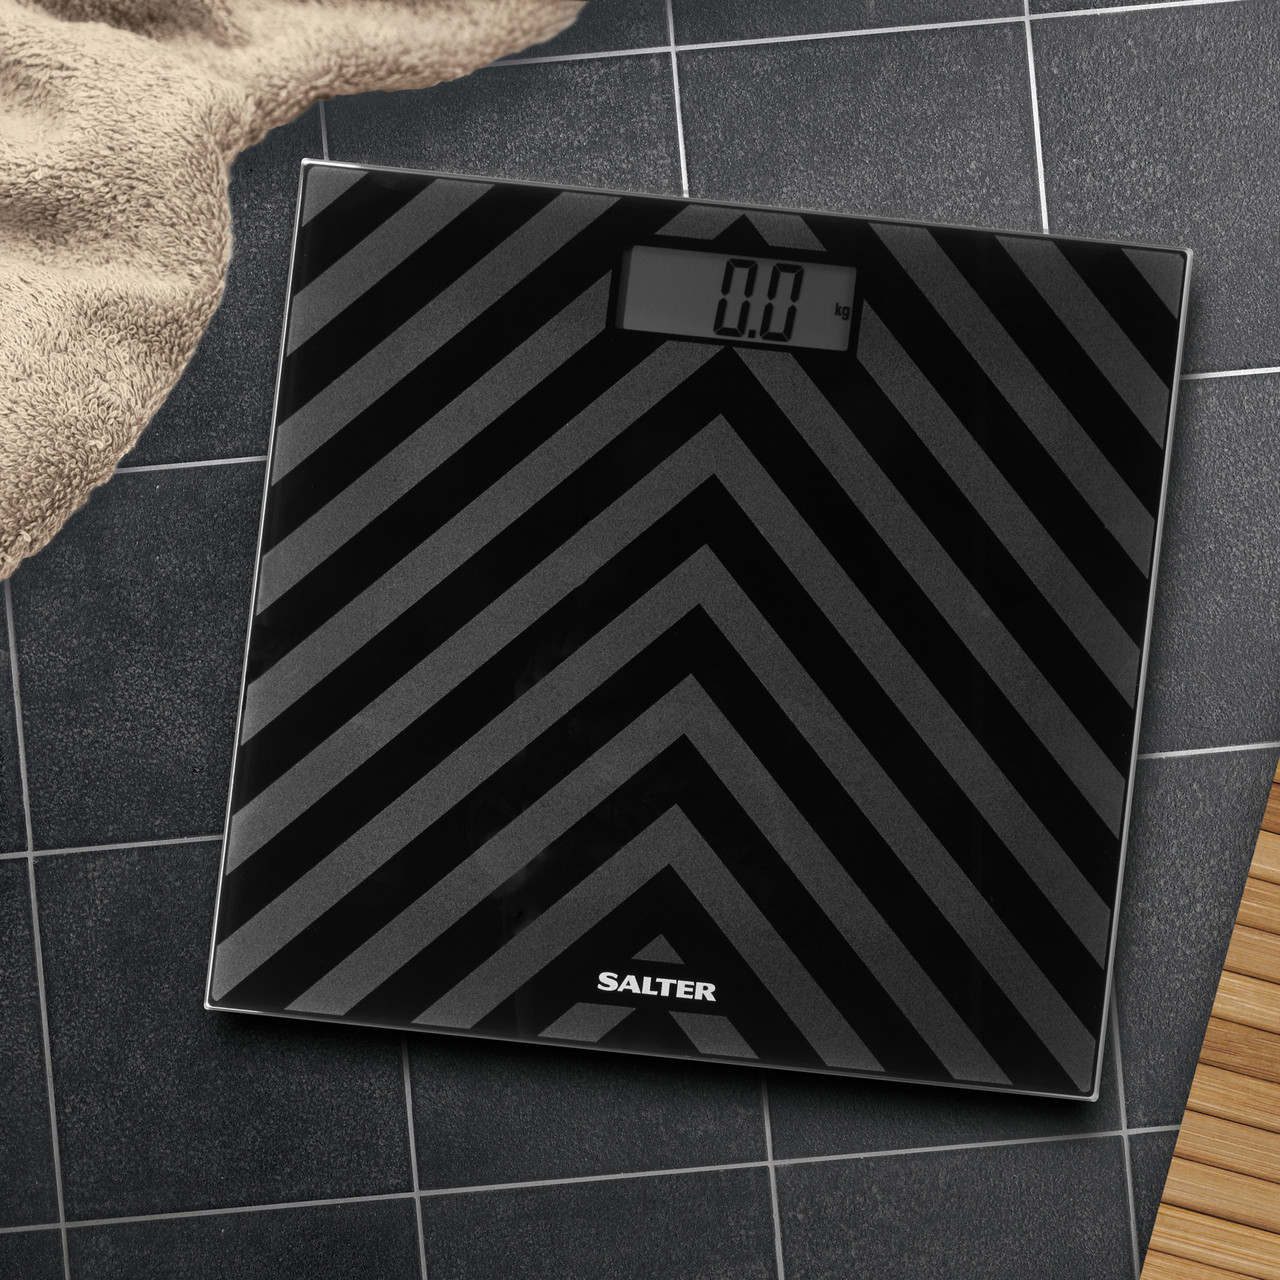 Digital Bathroom Scale with Black Textured Finish